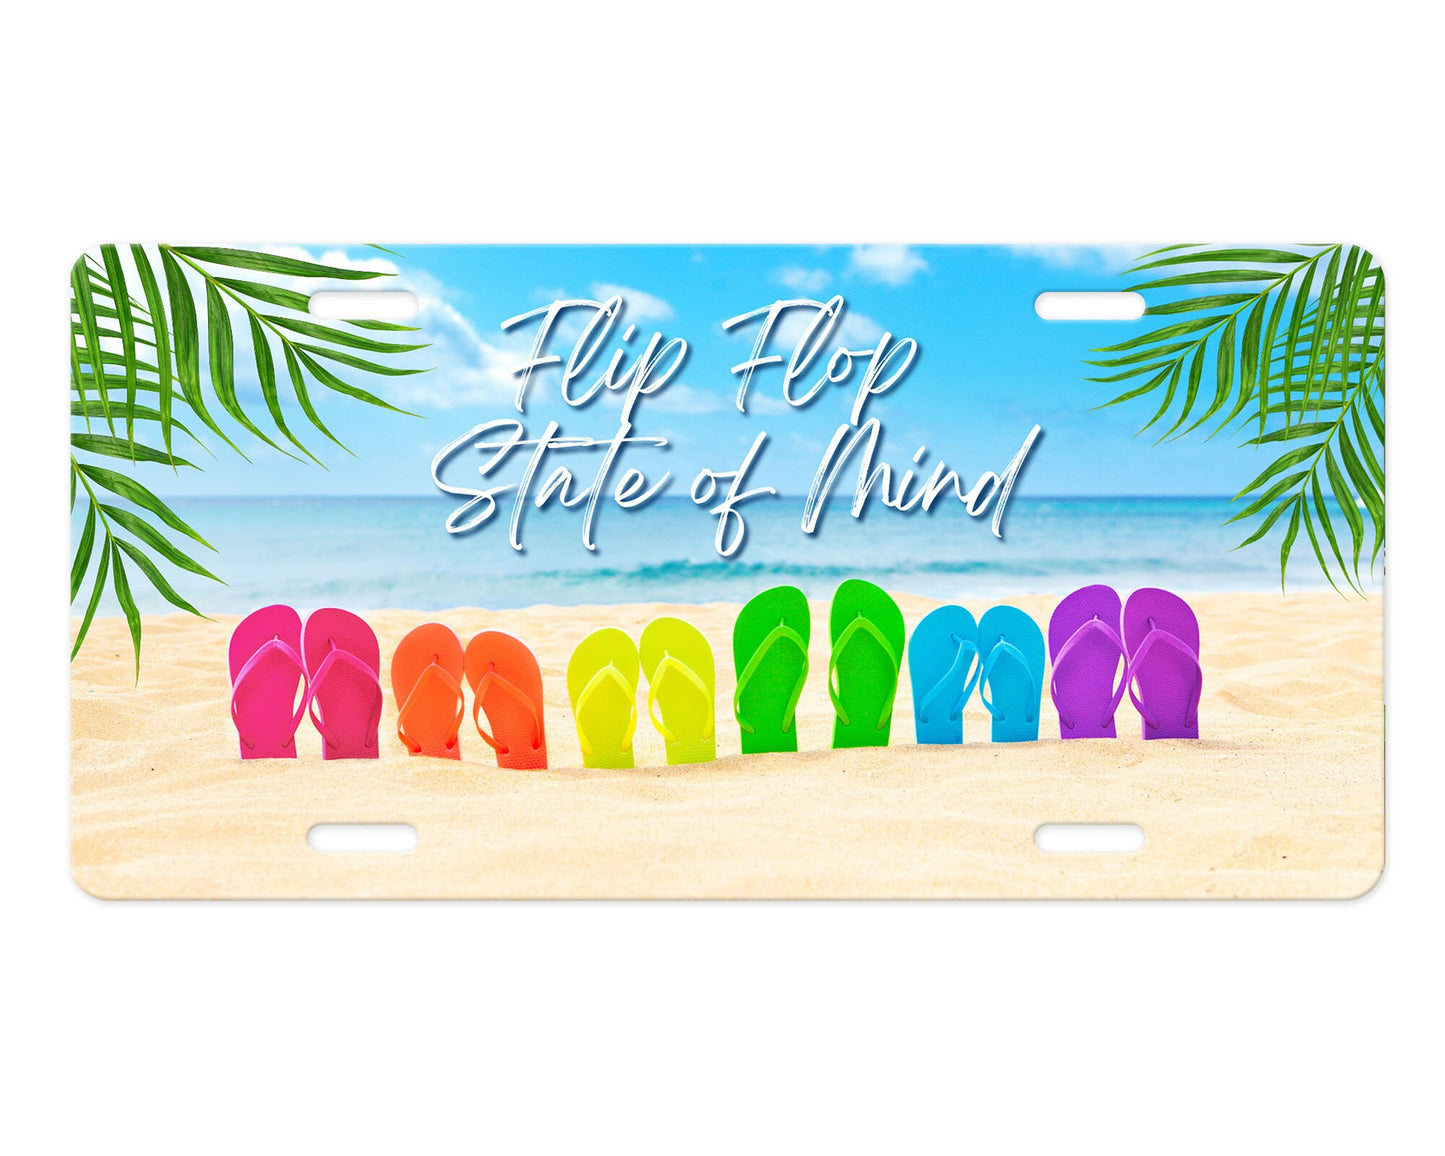 Flip Flop State of Mind Beach Summer Aluminum Vanity License Plate Car Accessory Decorative Front Plate